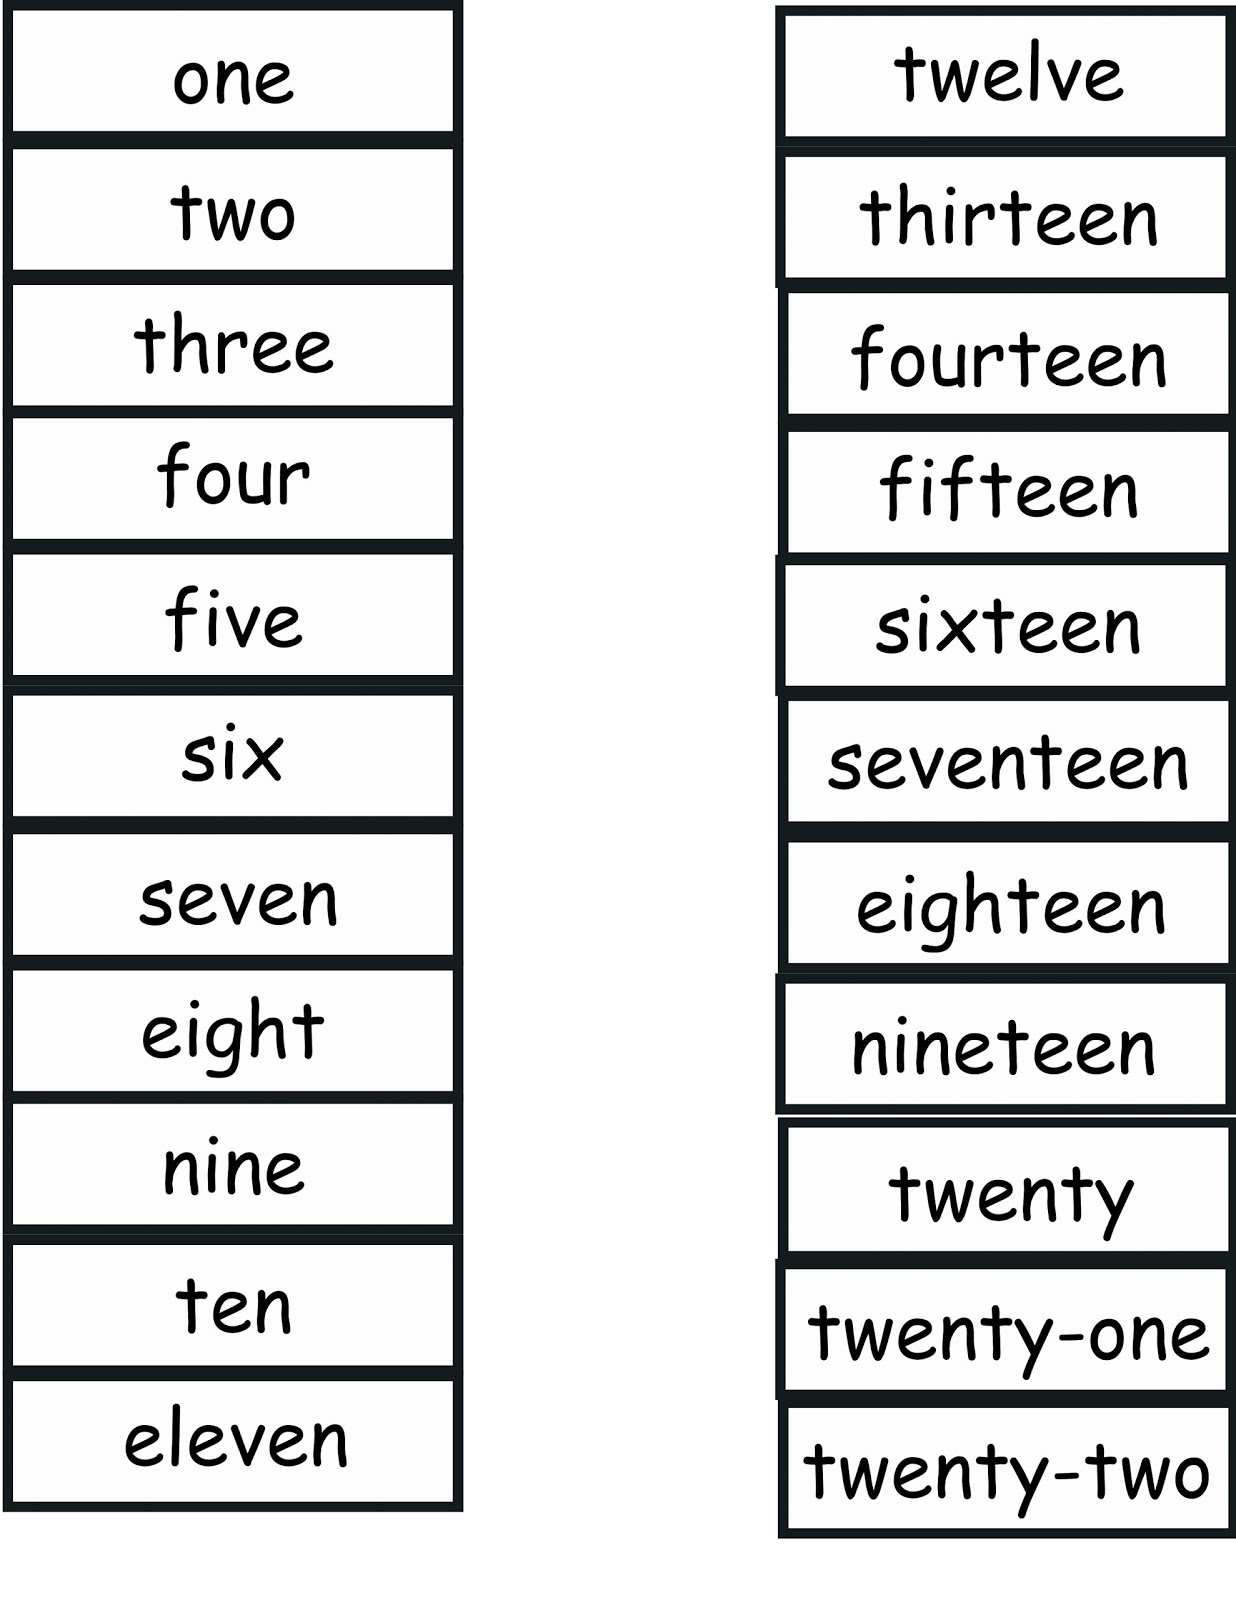 7-best-images-of-printable-number-words-1-10-number-words-1-10-images